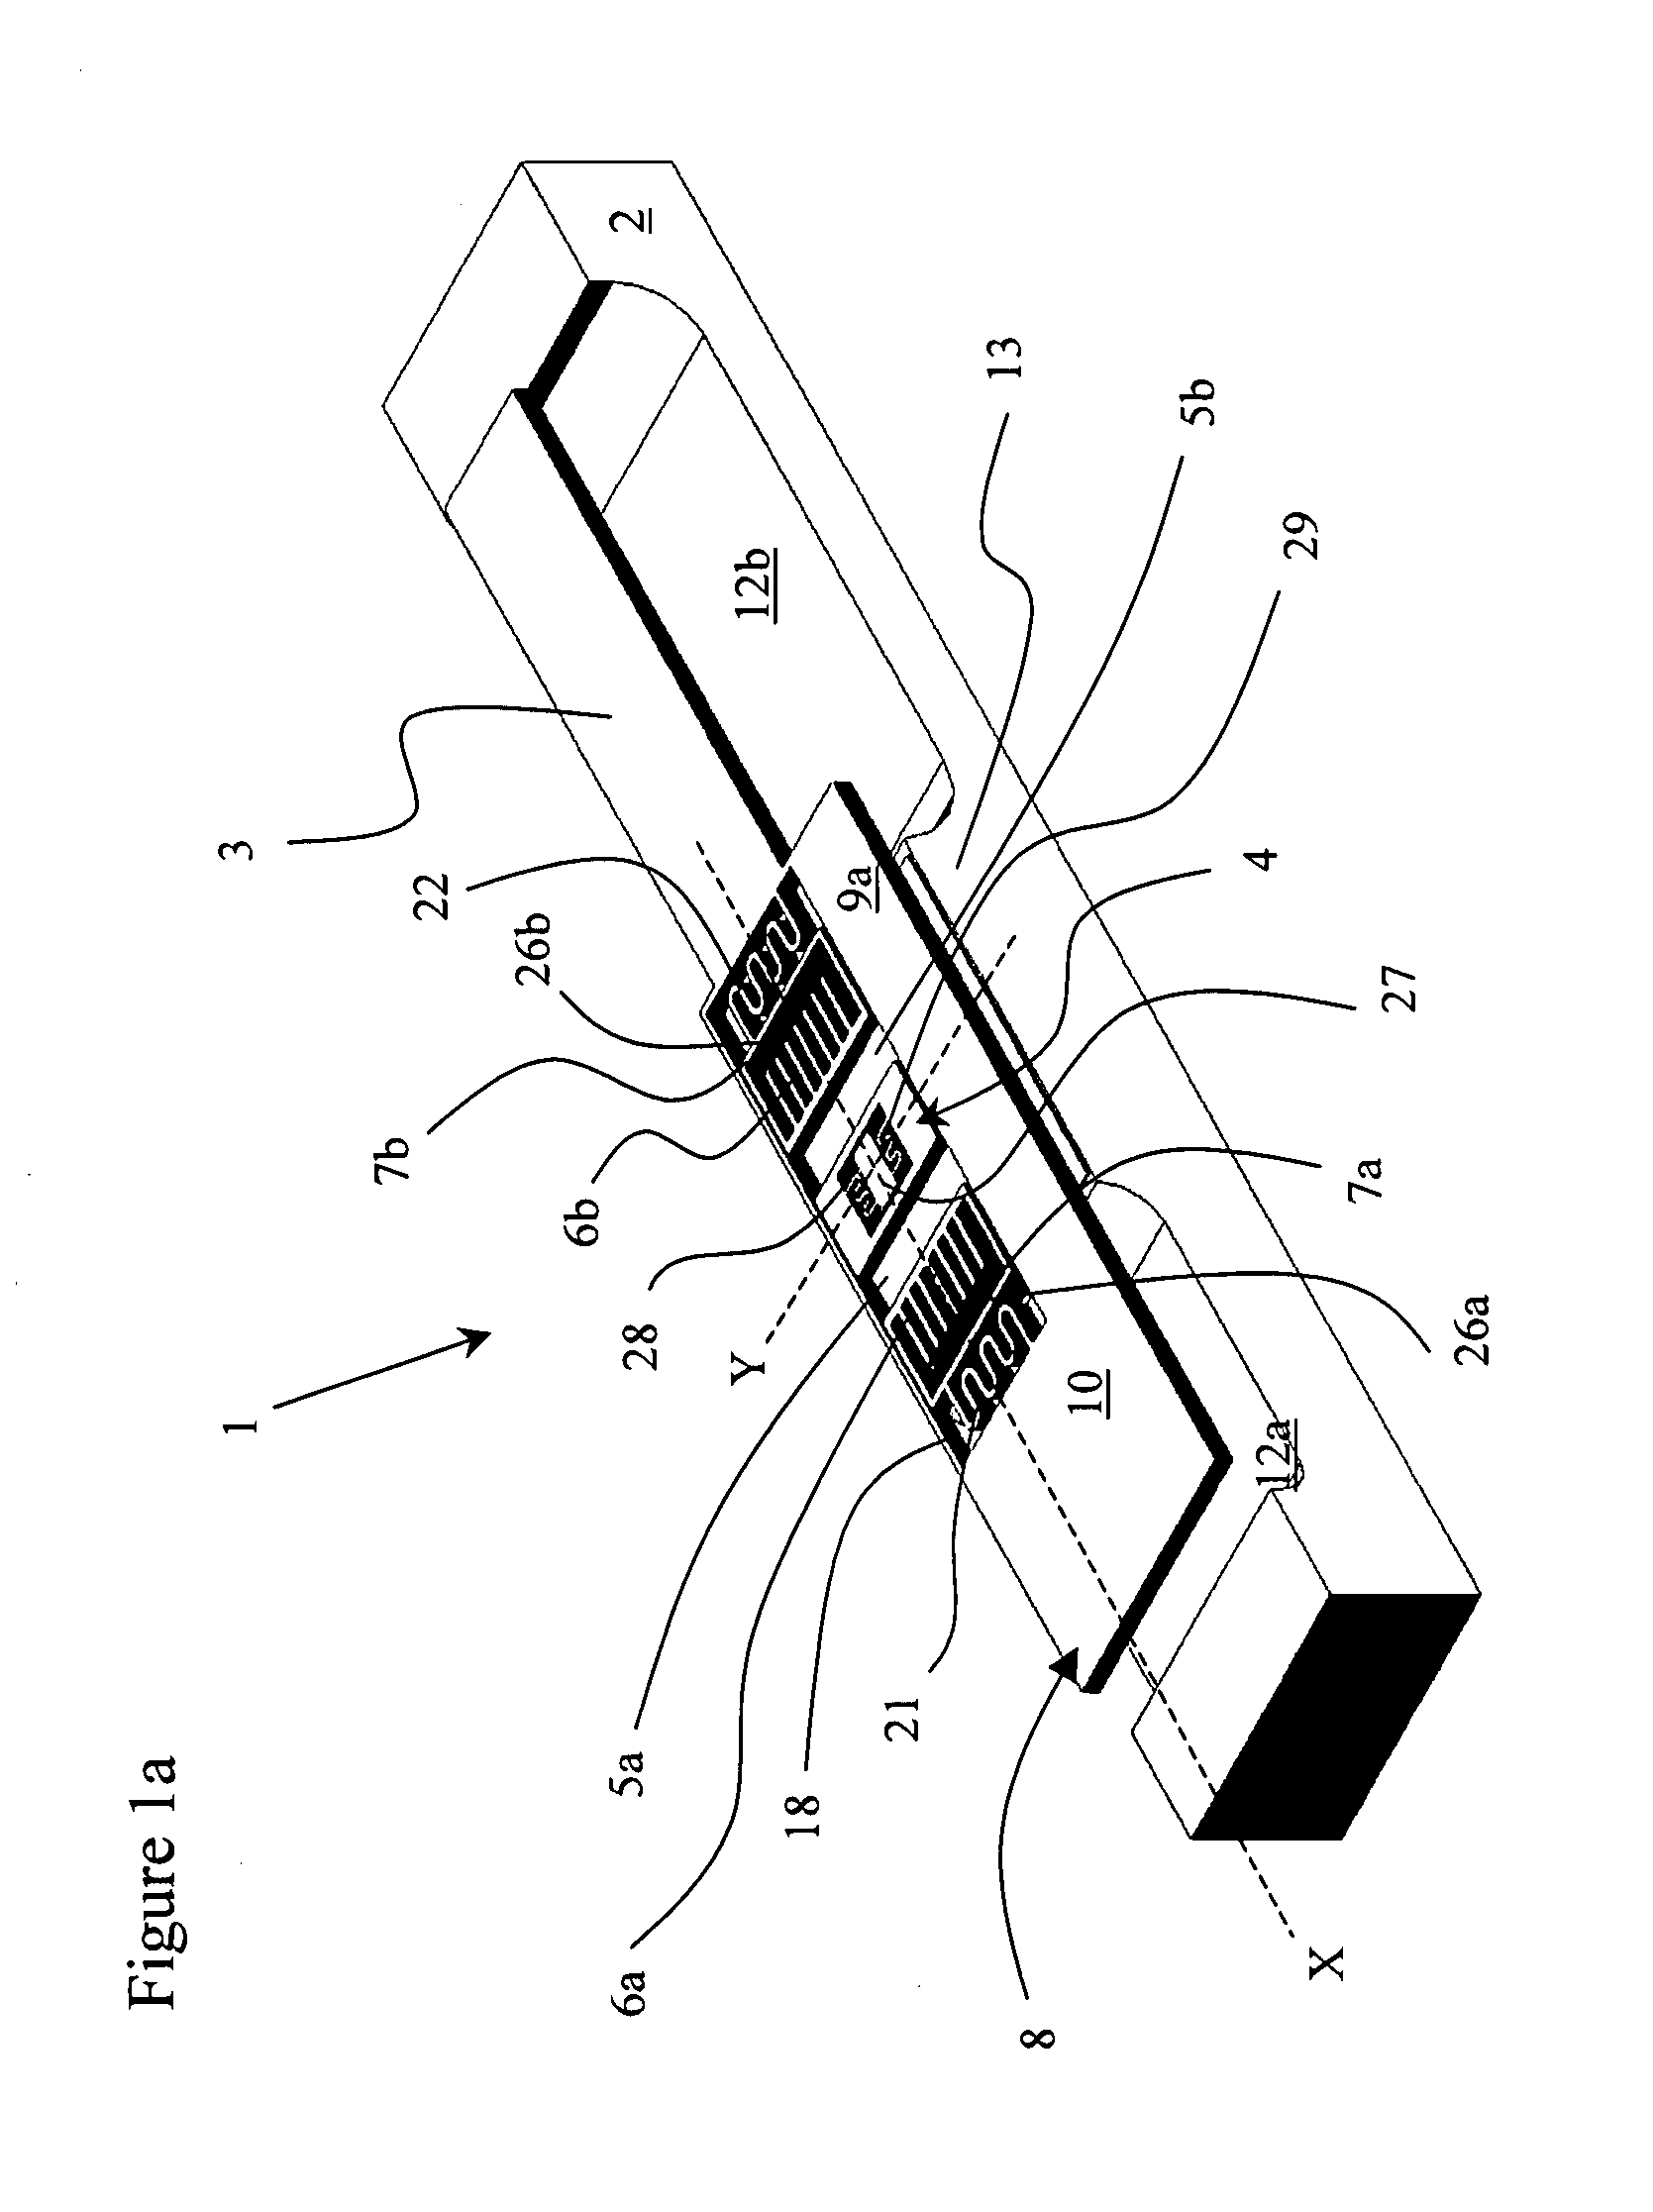 Micromirror device with a hybrid actuator